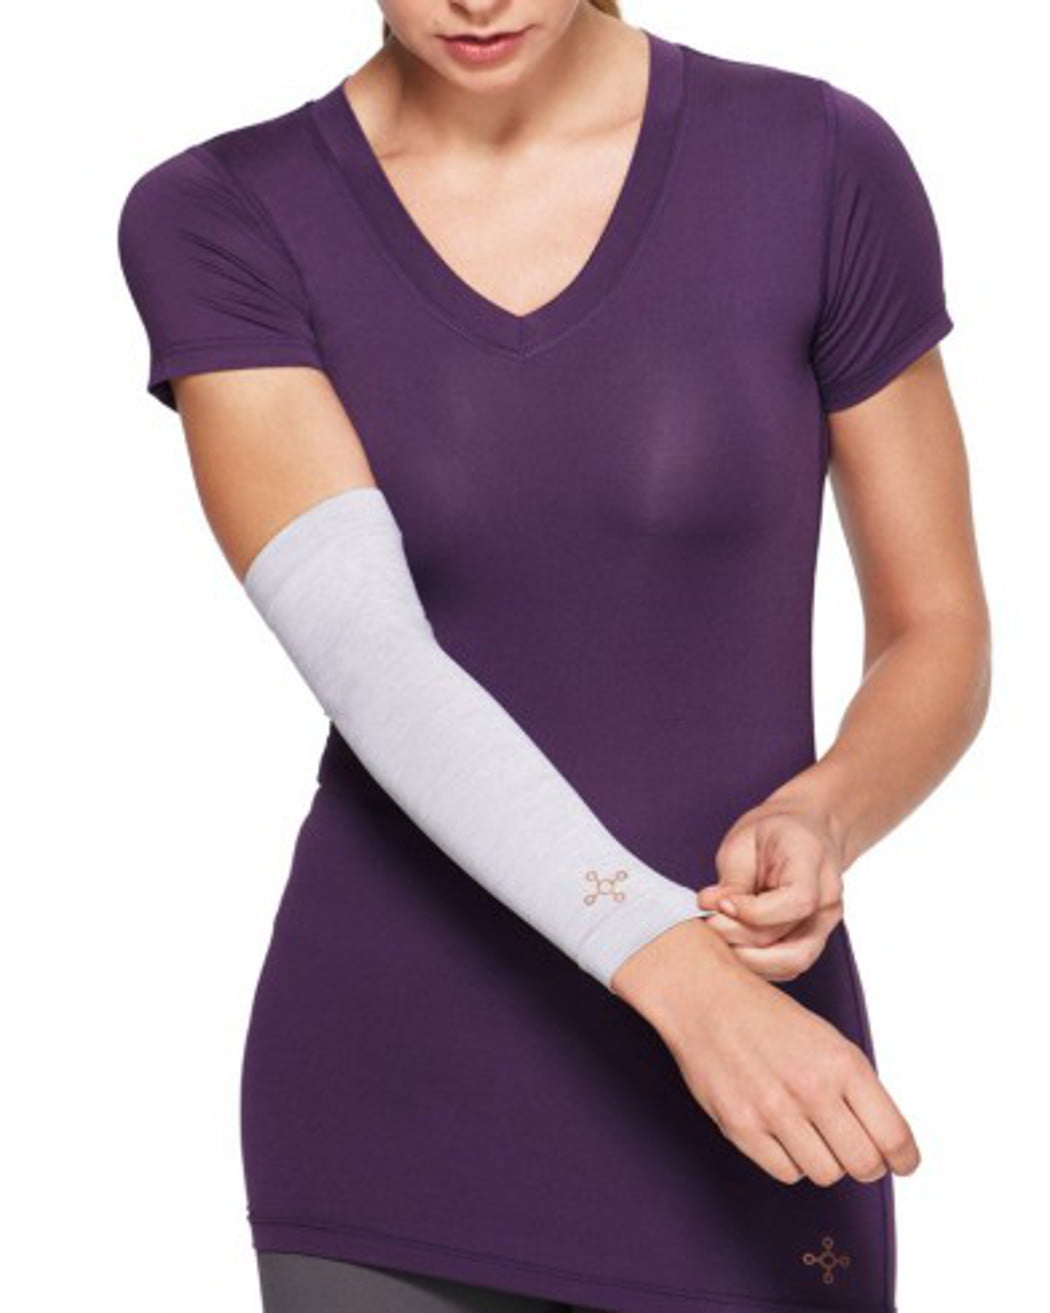 Tommie Copper Recovery Full Arm Sleeve for Women Silver Heather L